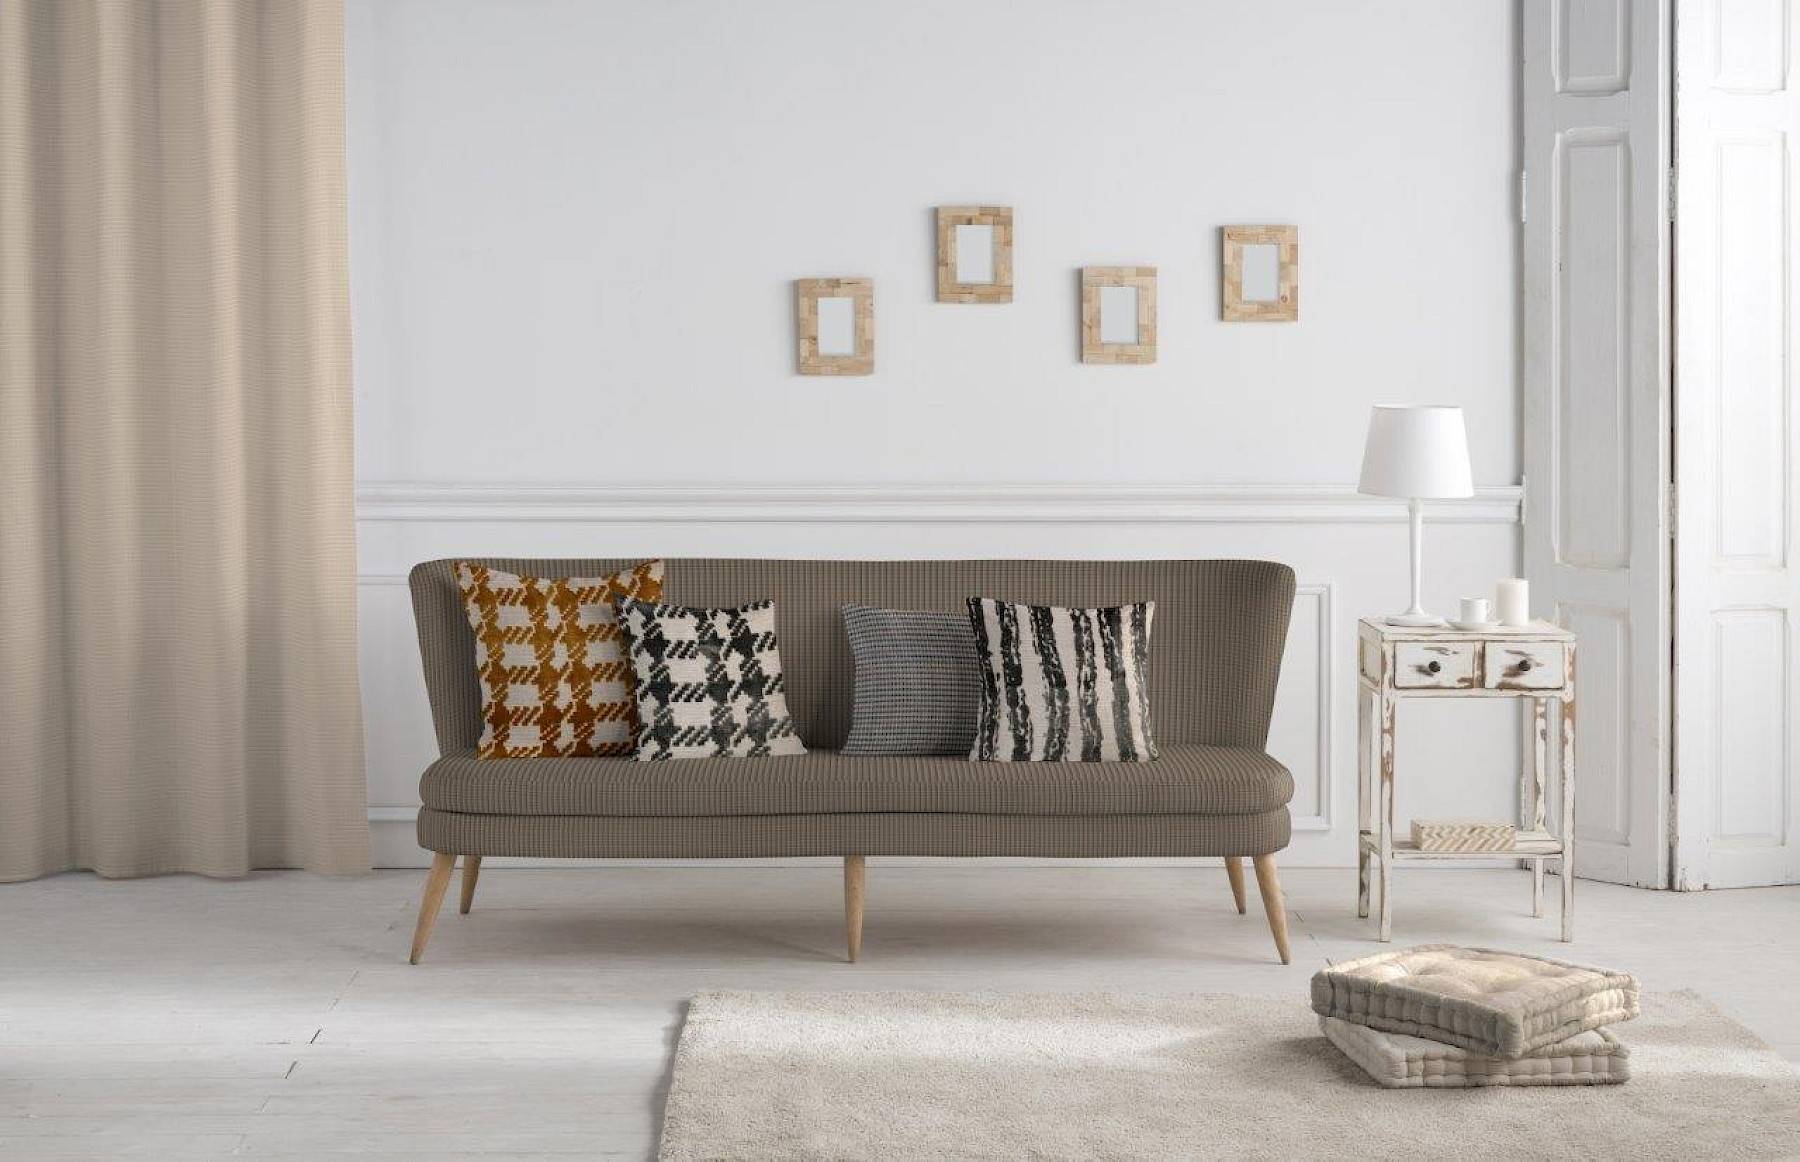 pillows in Inari style on bench in minimalist living room